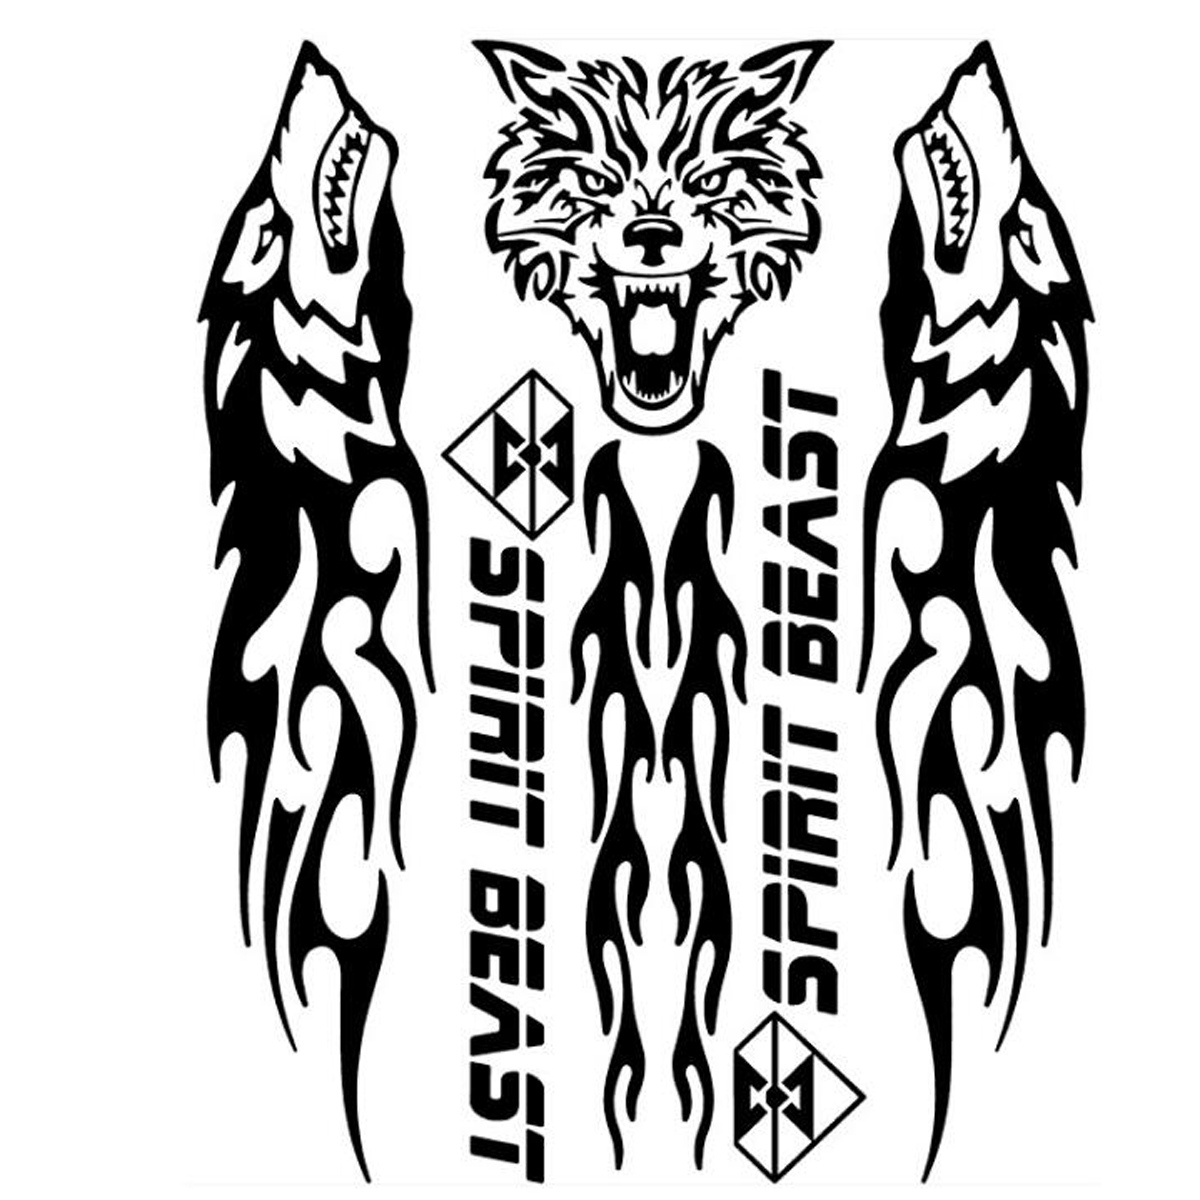 SPIRIT BEAST Reflective Motorcycle Stickers Gas Fuel Tank Protector Car Decoration